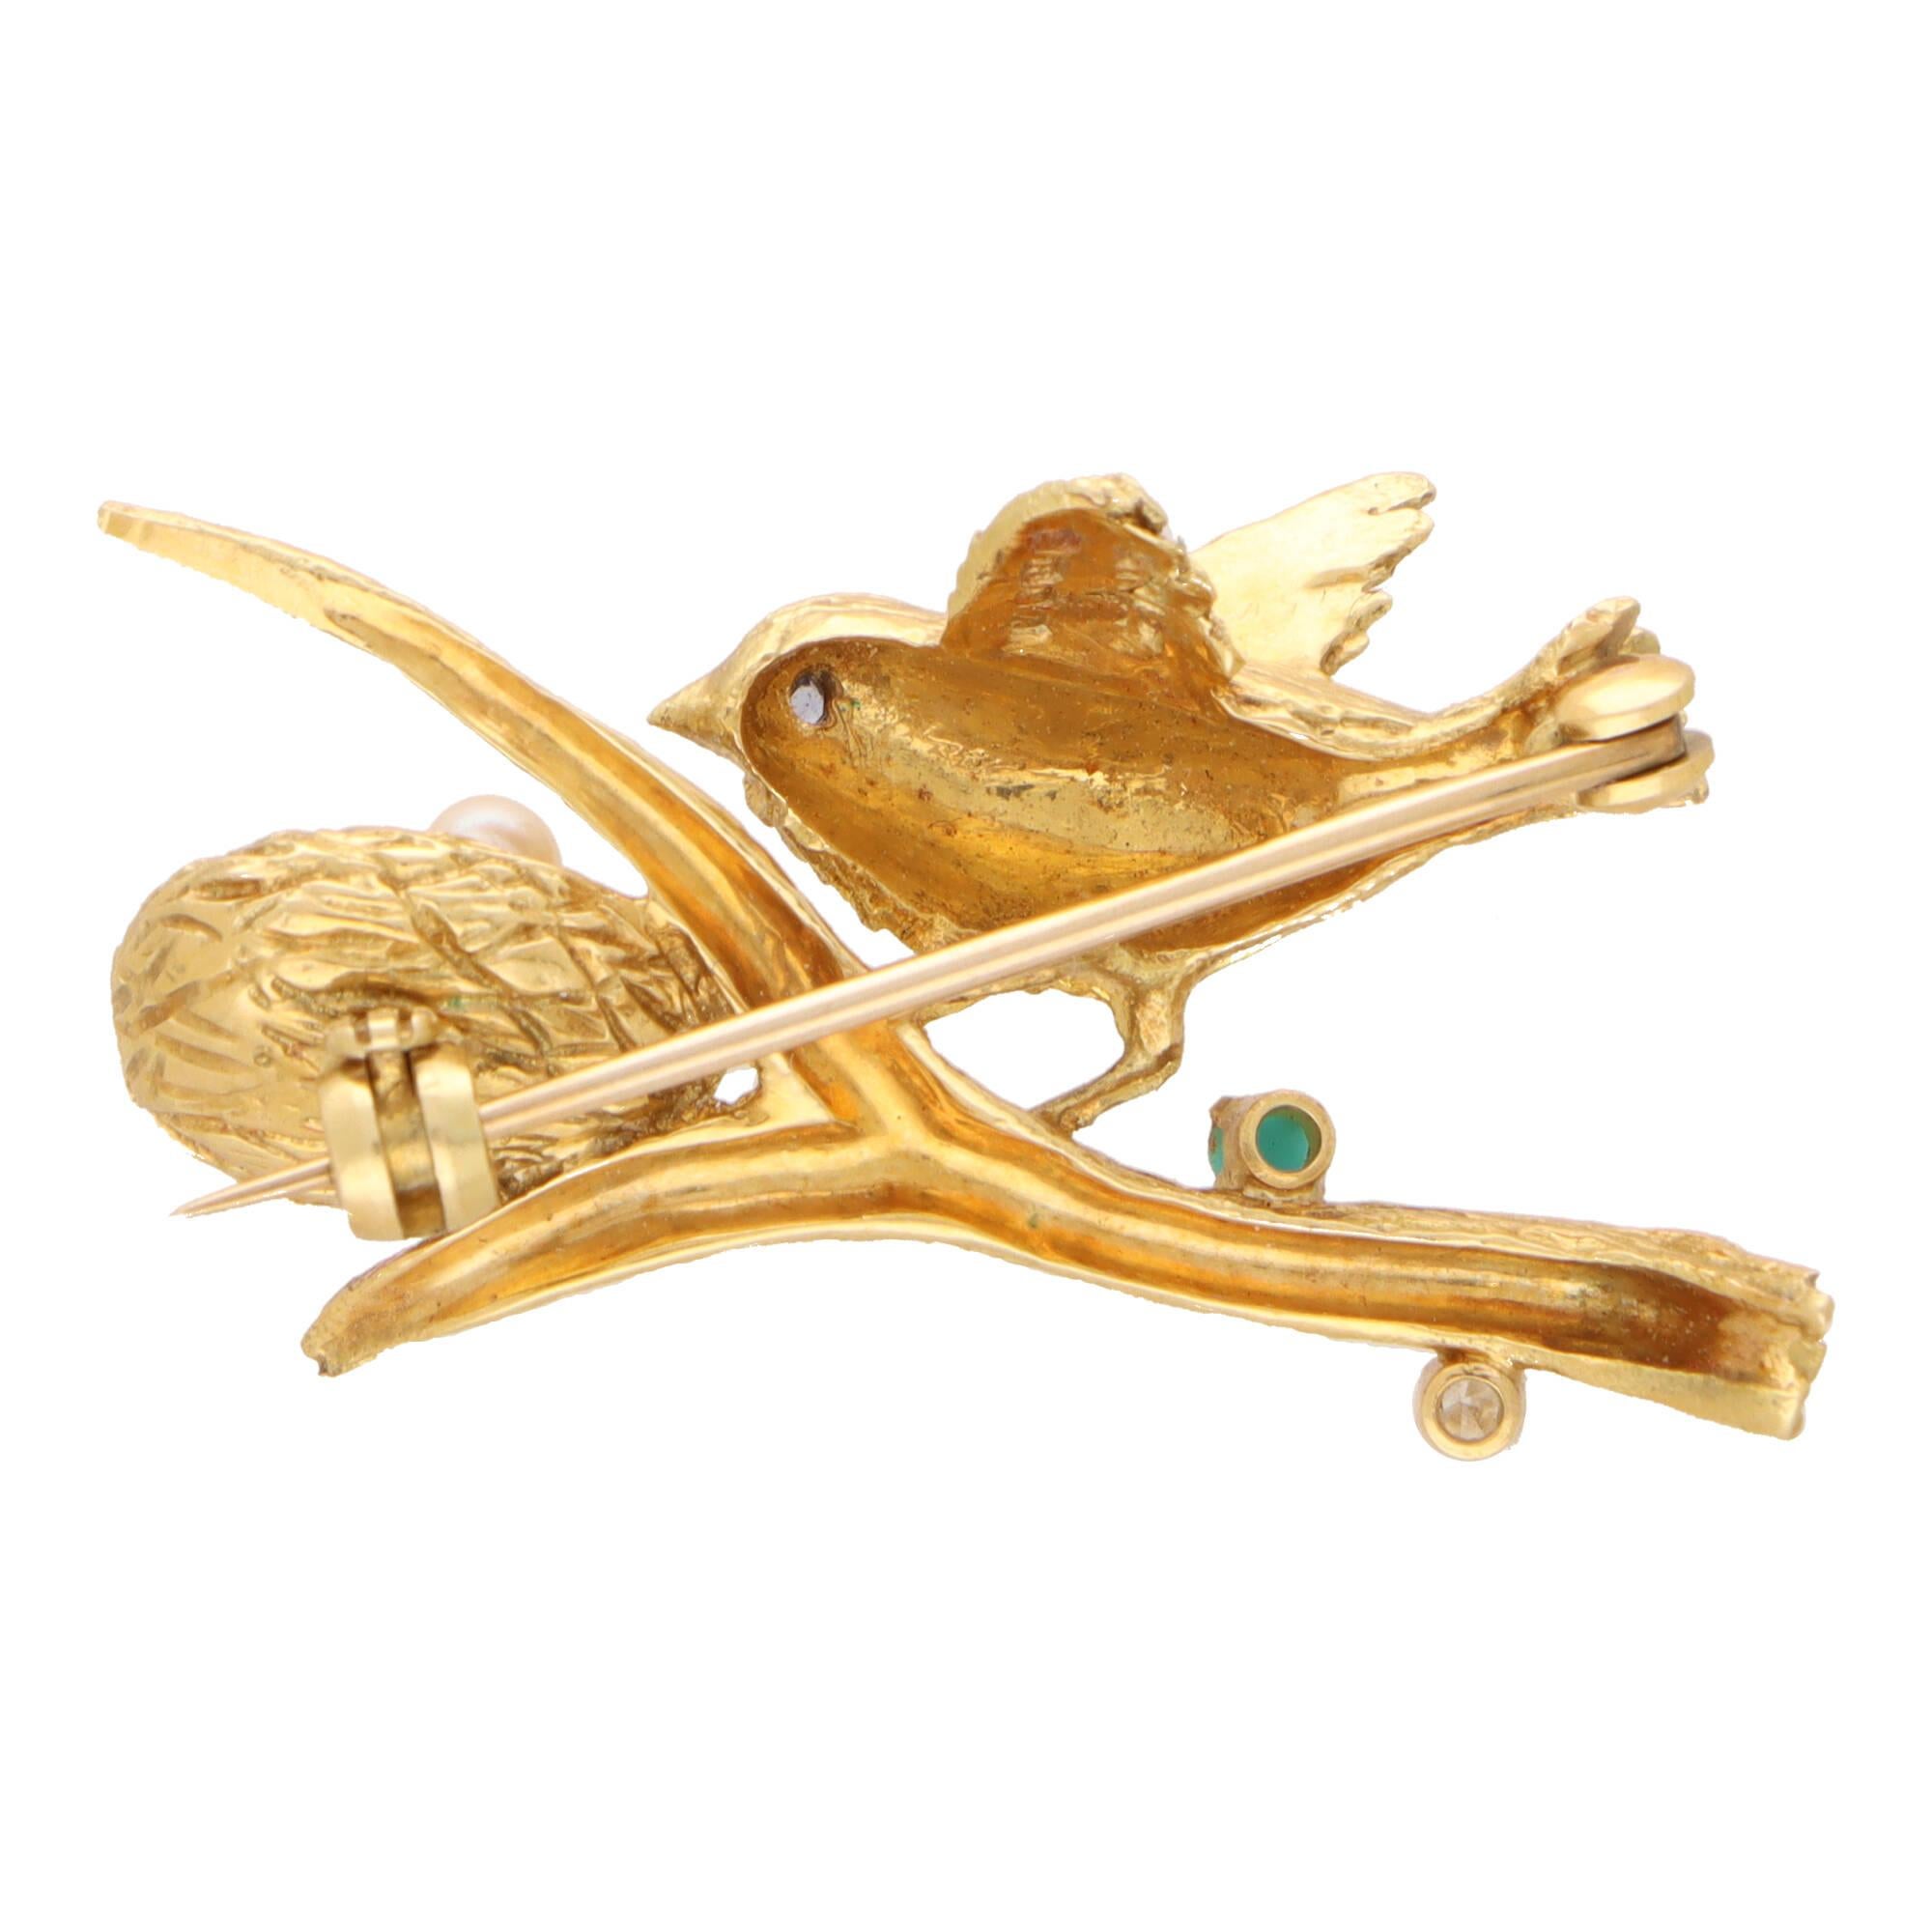 A beautiful vintage bird and nest brooch set in 18k yellow gold.

The brooch depicts a bird perching on a branch beside it’s nest. It has been beautifully hand crafted and the gold has been carved to depict naturalistic features! The nest is set